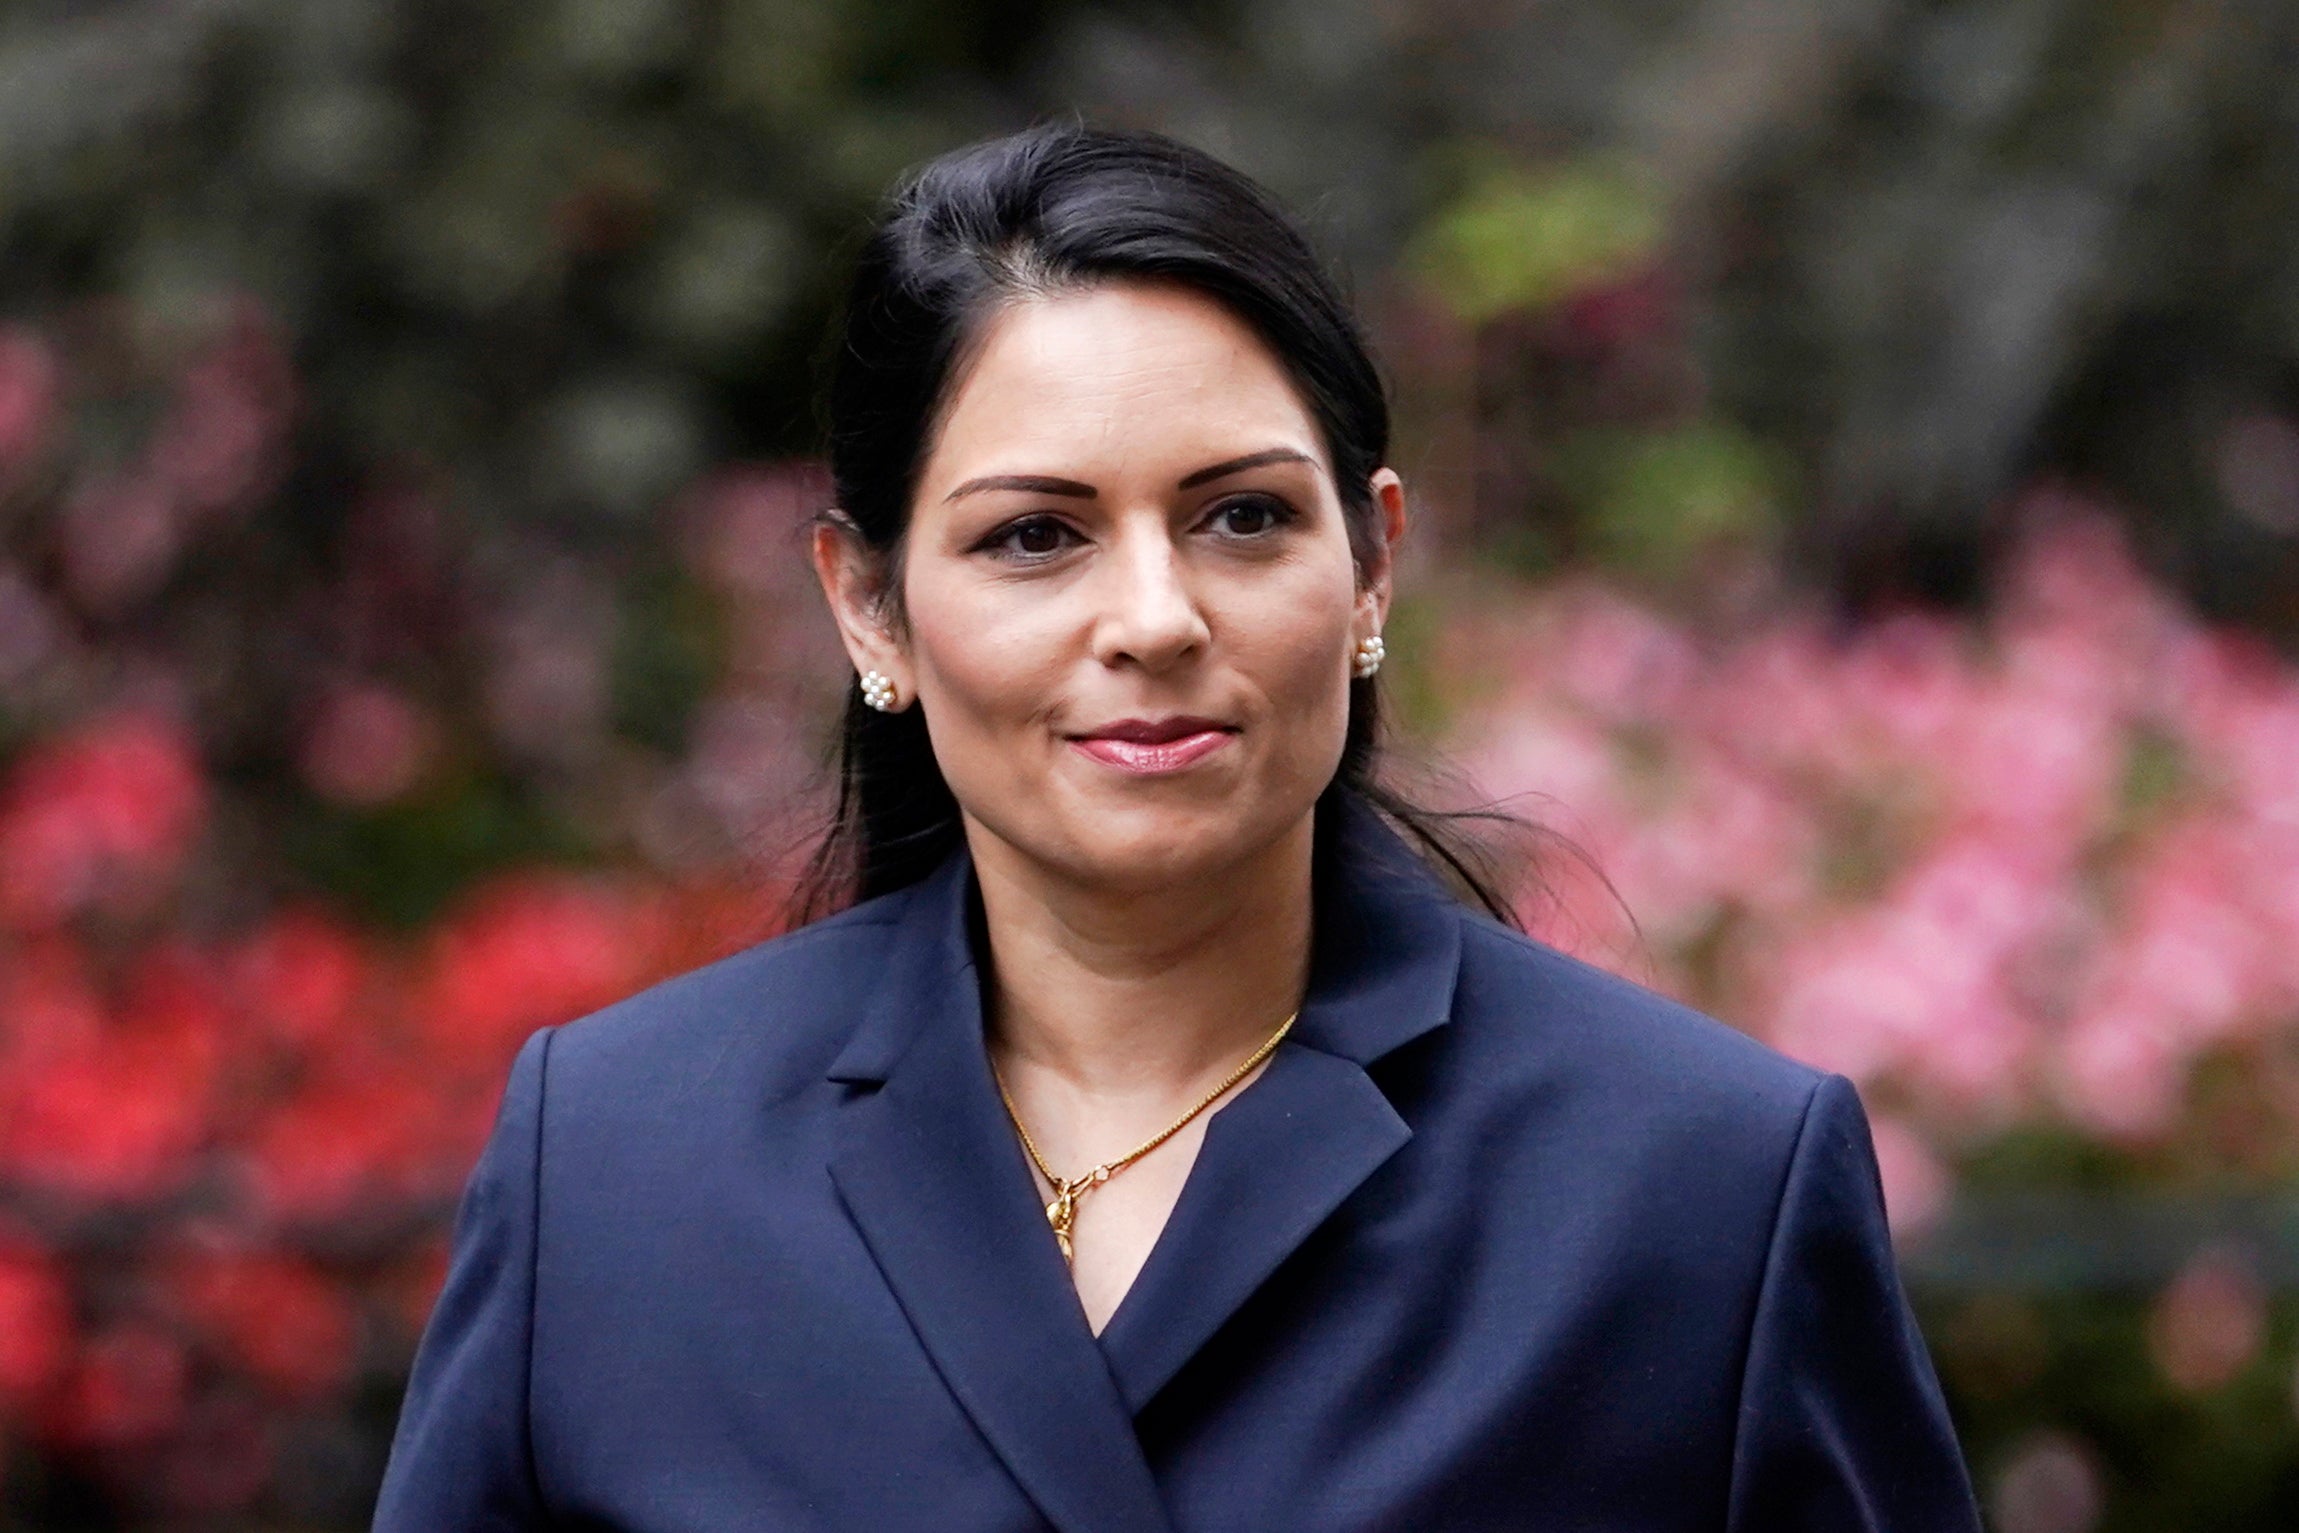 Home secretary Priti Patel ordered officials to look into the possibility of building an asylum processing centre on Ascension Island